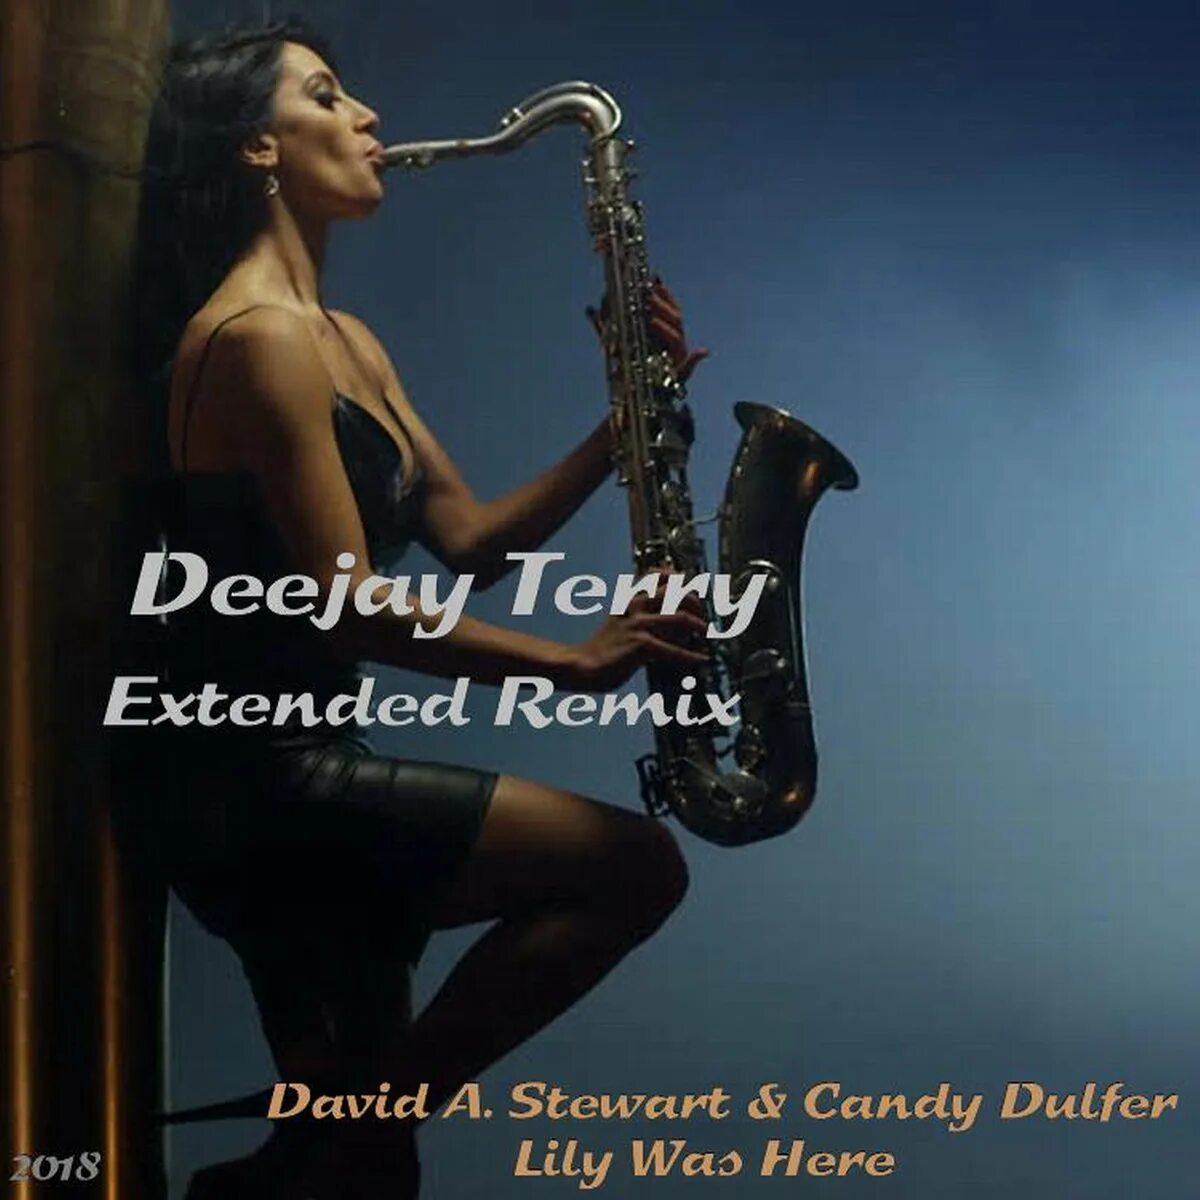 David a stewart lily was here mp3. Candy Dulfer Lily was here. Кэнди Далфер саксофон. Candy Dulfer & David a. Stewart. Костюм саксофонистки.